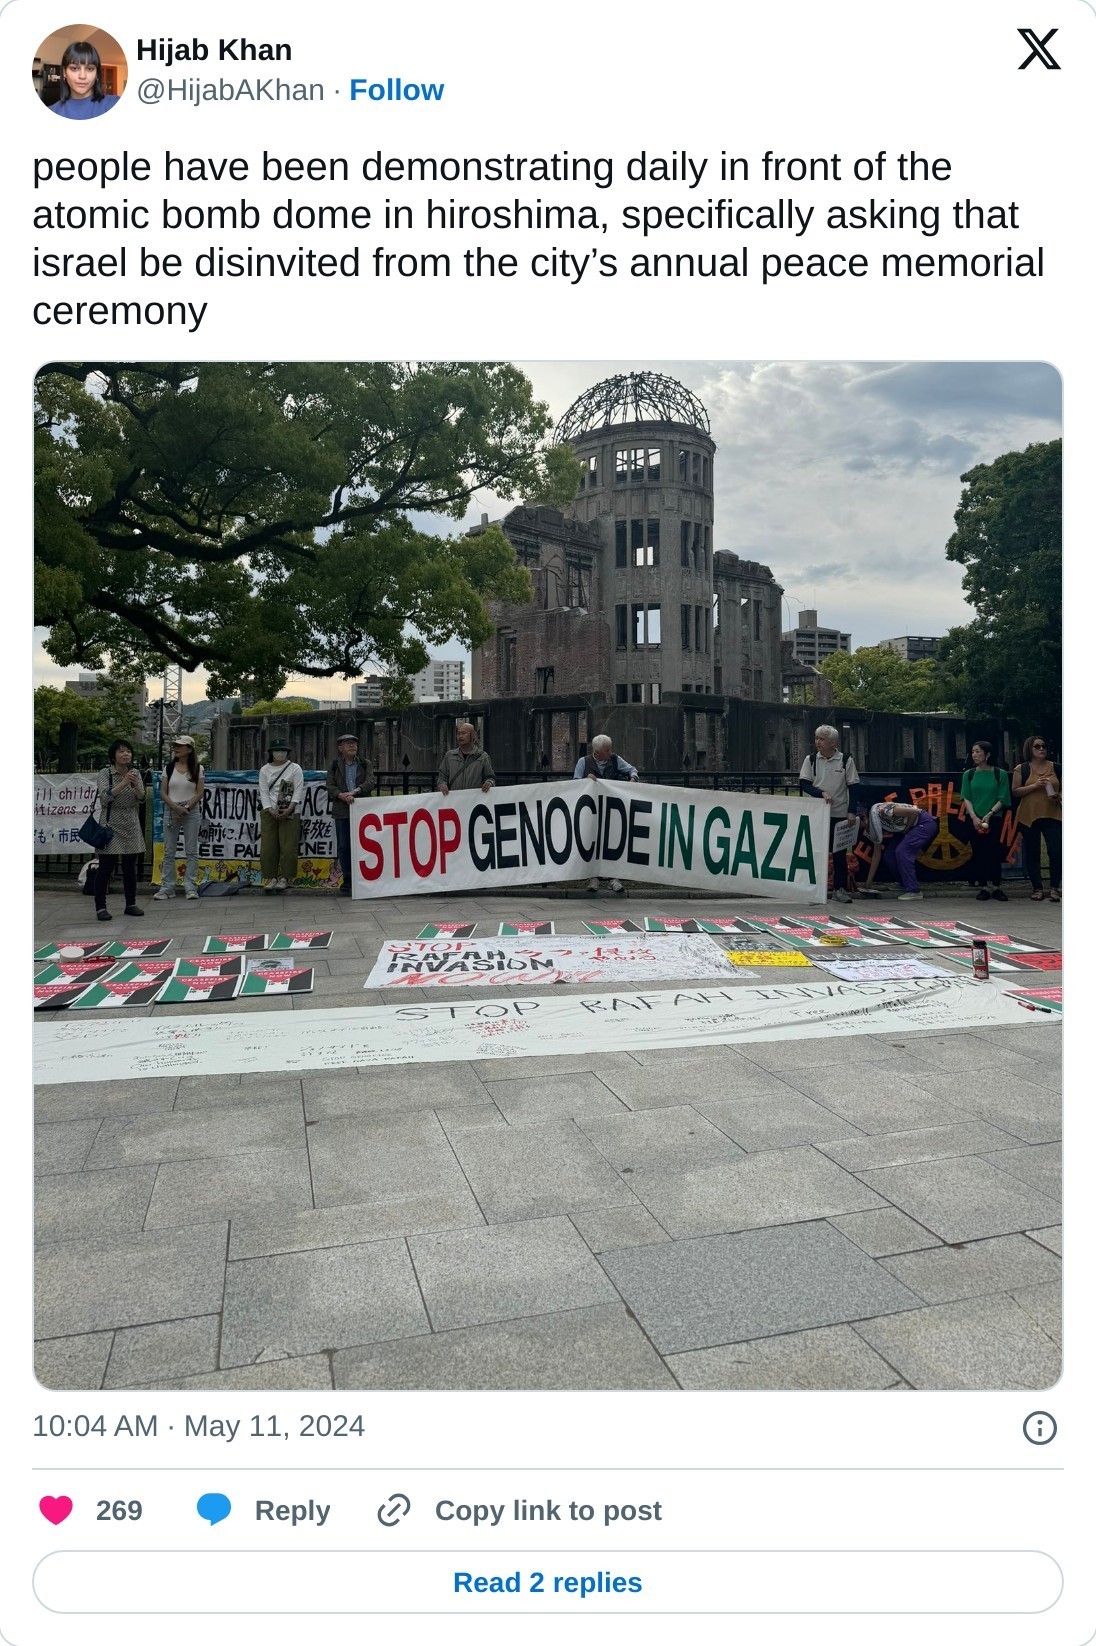 people have been demonstrating daily in front of the atomic bomb dome in hiroshima, specifically asking that israel be disinvited from the city’s annual peace memorial ceremony pic.twitter.com/FlHnTaZxYA  — Hijab Khan (@HijabAKhan) May 11, 2024